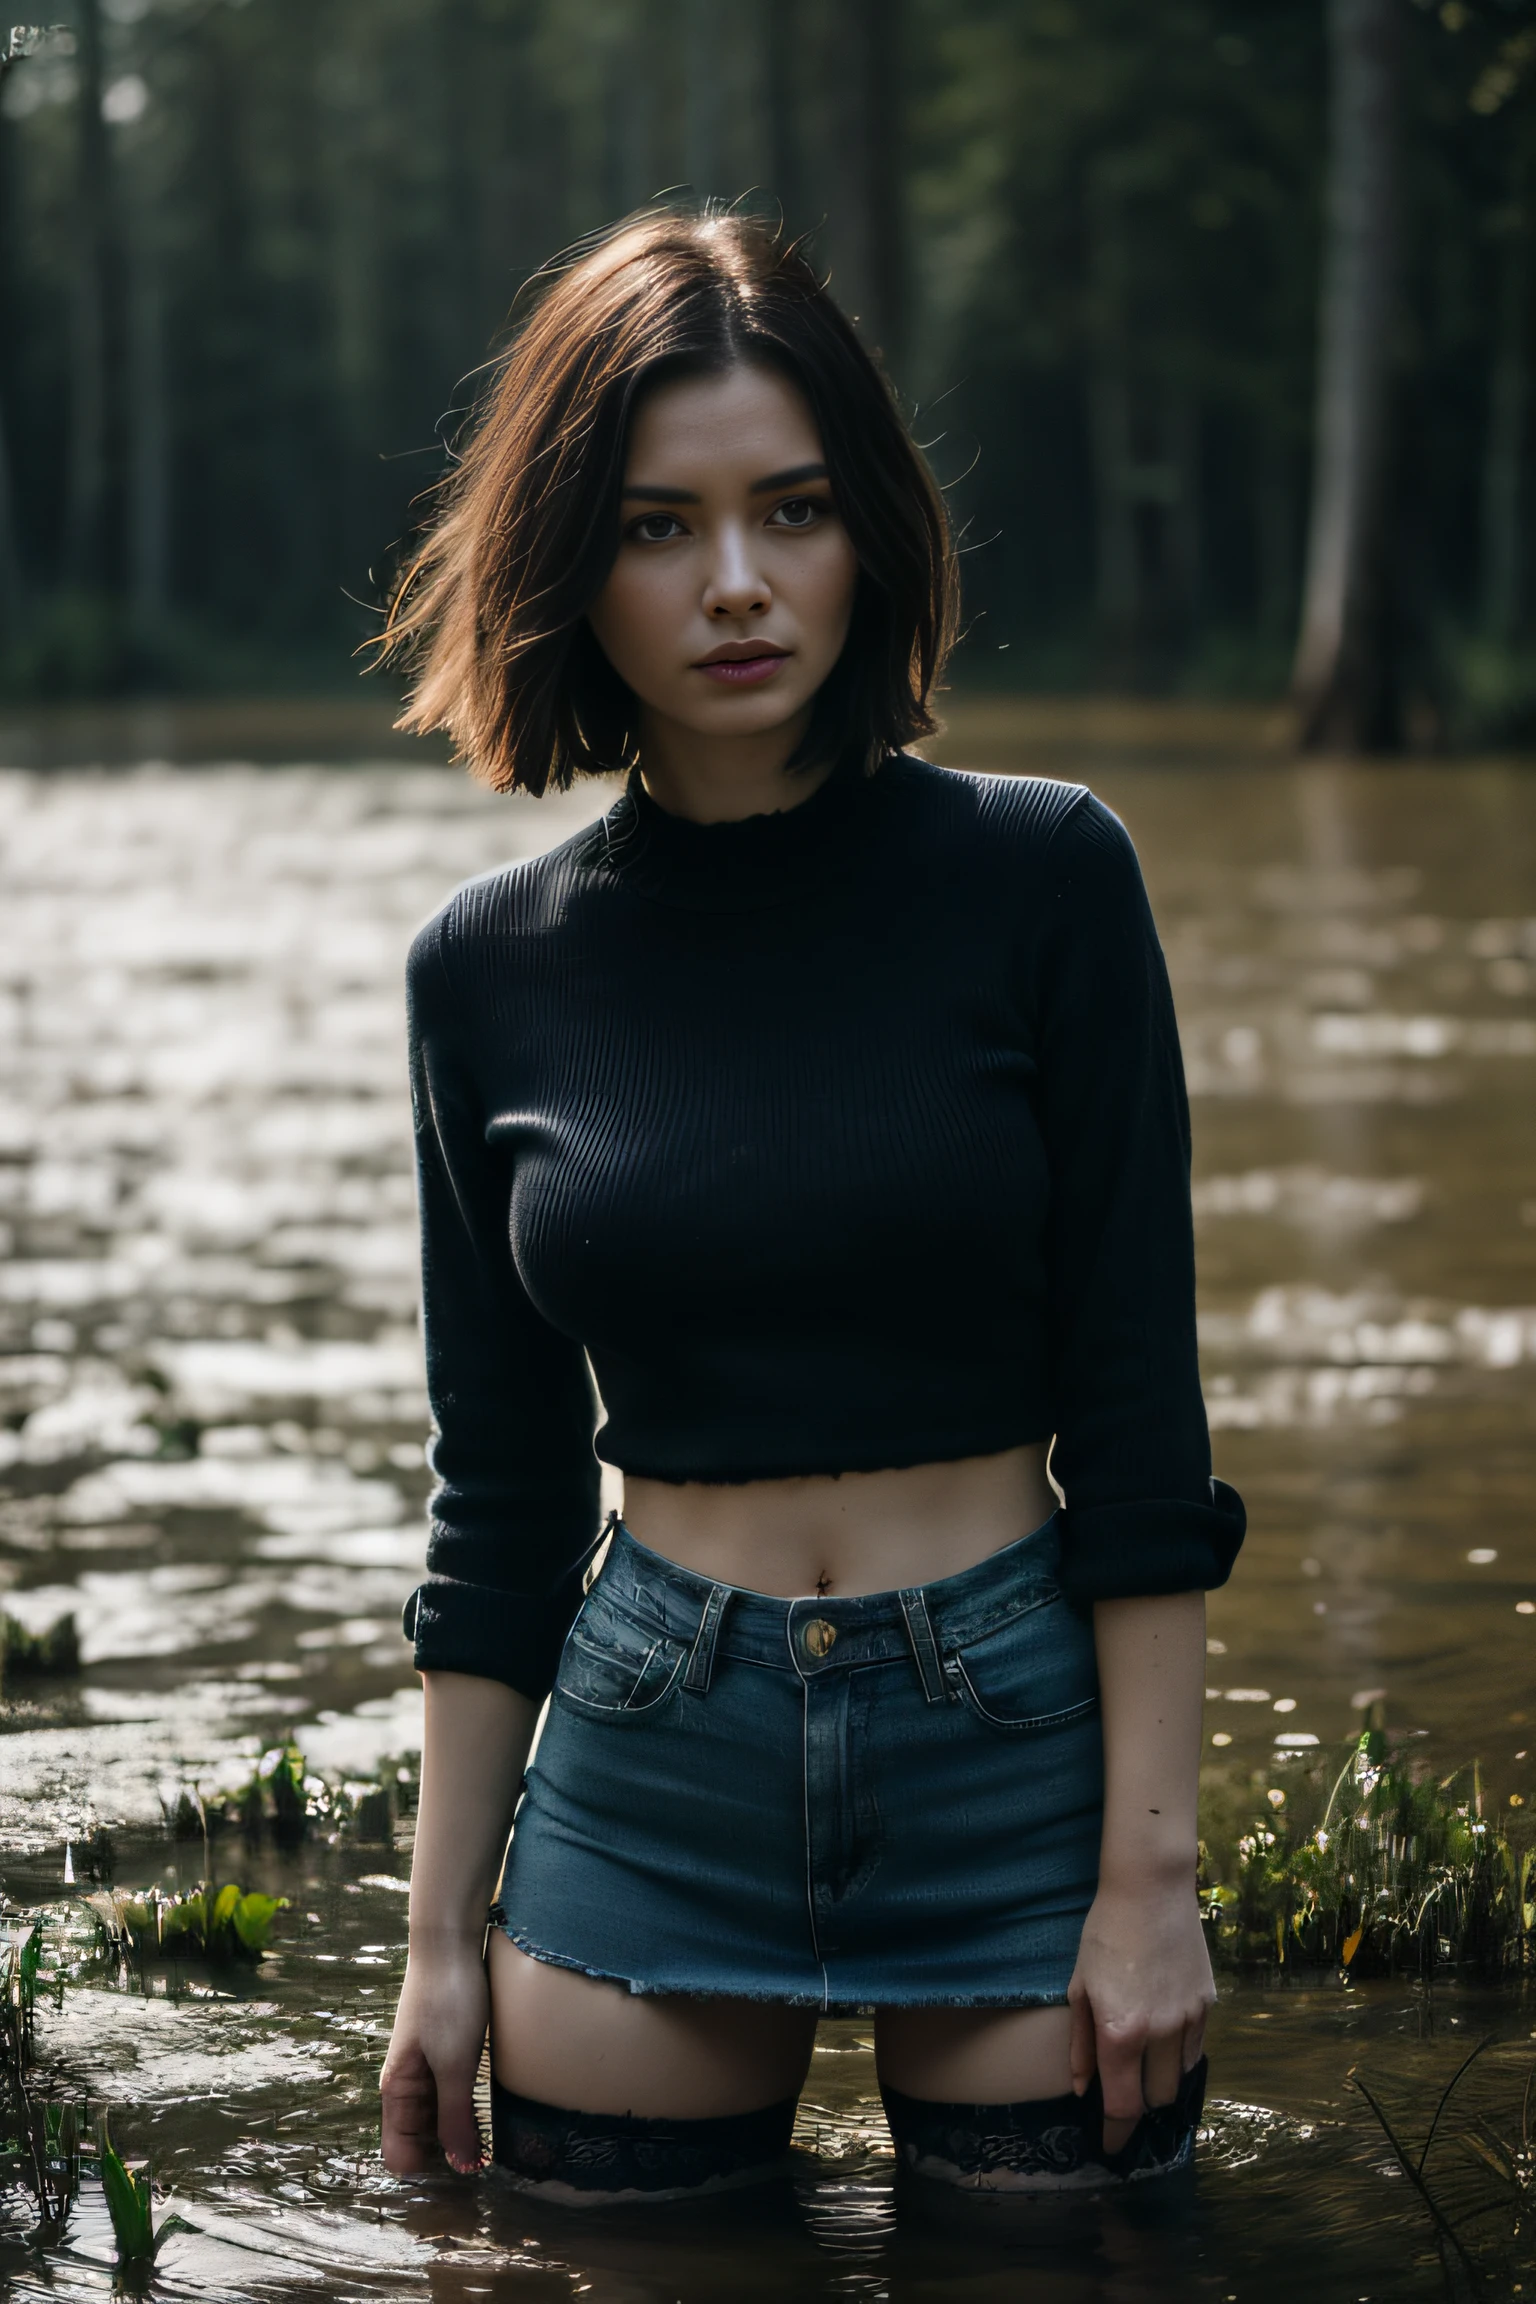 "(Best Quality,hight resolution:1.2),The woman,Expressive wrinkles,Bob haircut,jeans skirt,blouse,dark lace stockings with garters, ( drowning in a swamp:1.2),Detailed eyes and face,expression of despair,Dark and moody lighting,ominous vibe,desperation,trap, Imminent Doom"Sharing